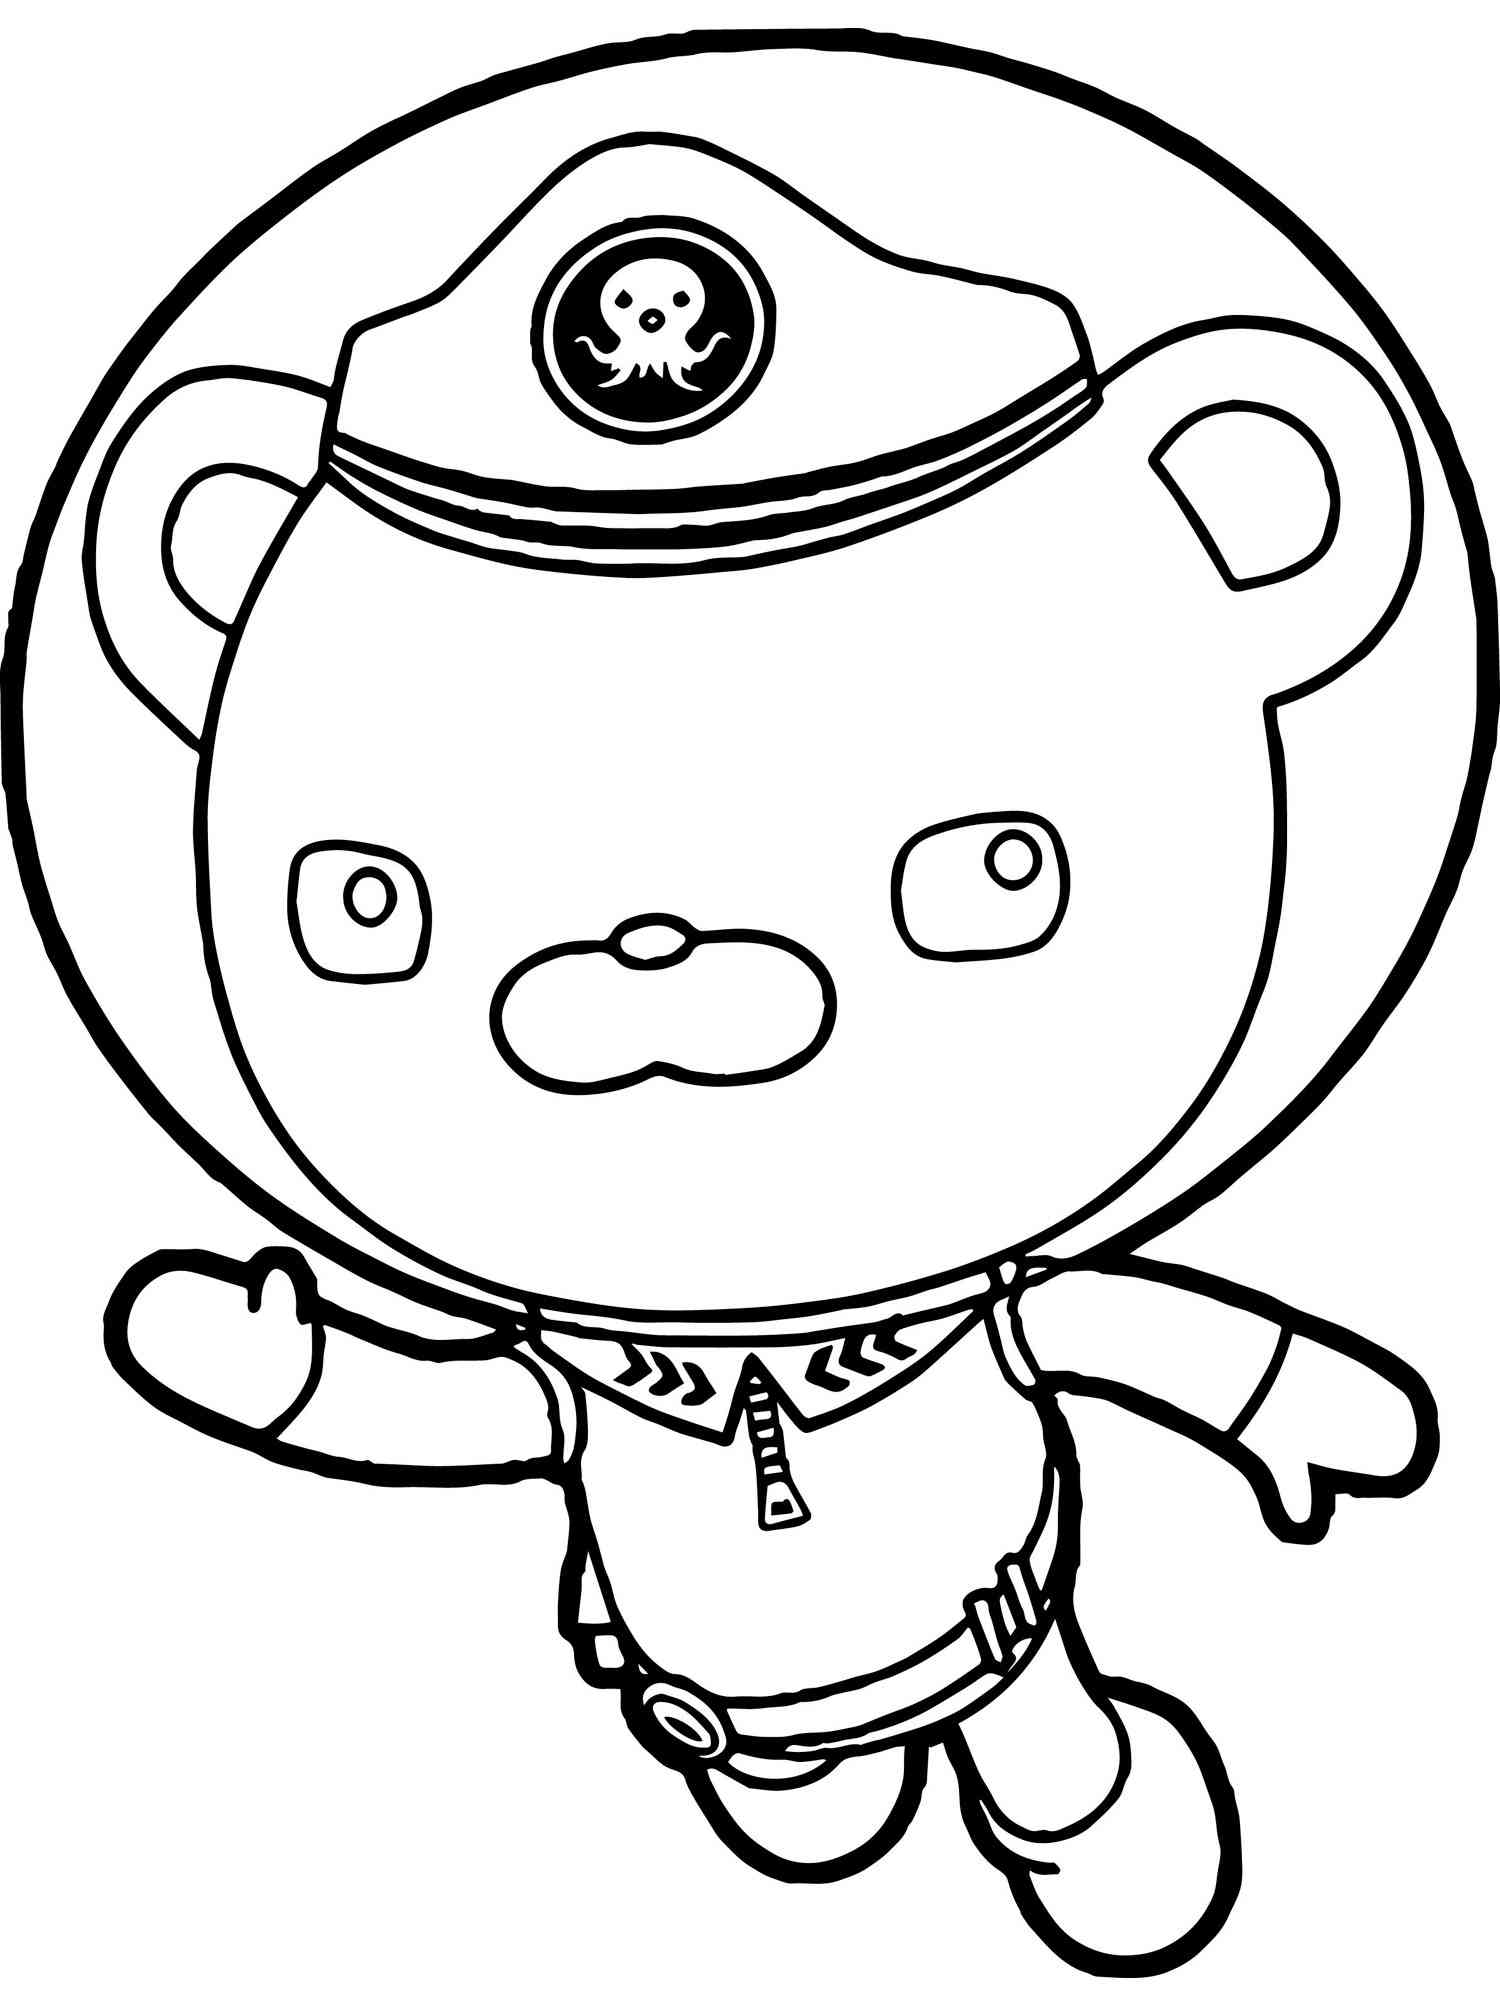 Captain Barnacles 1 coloring page